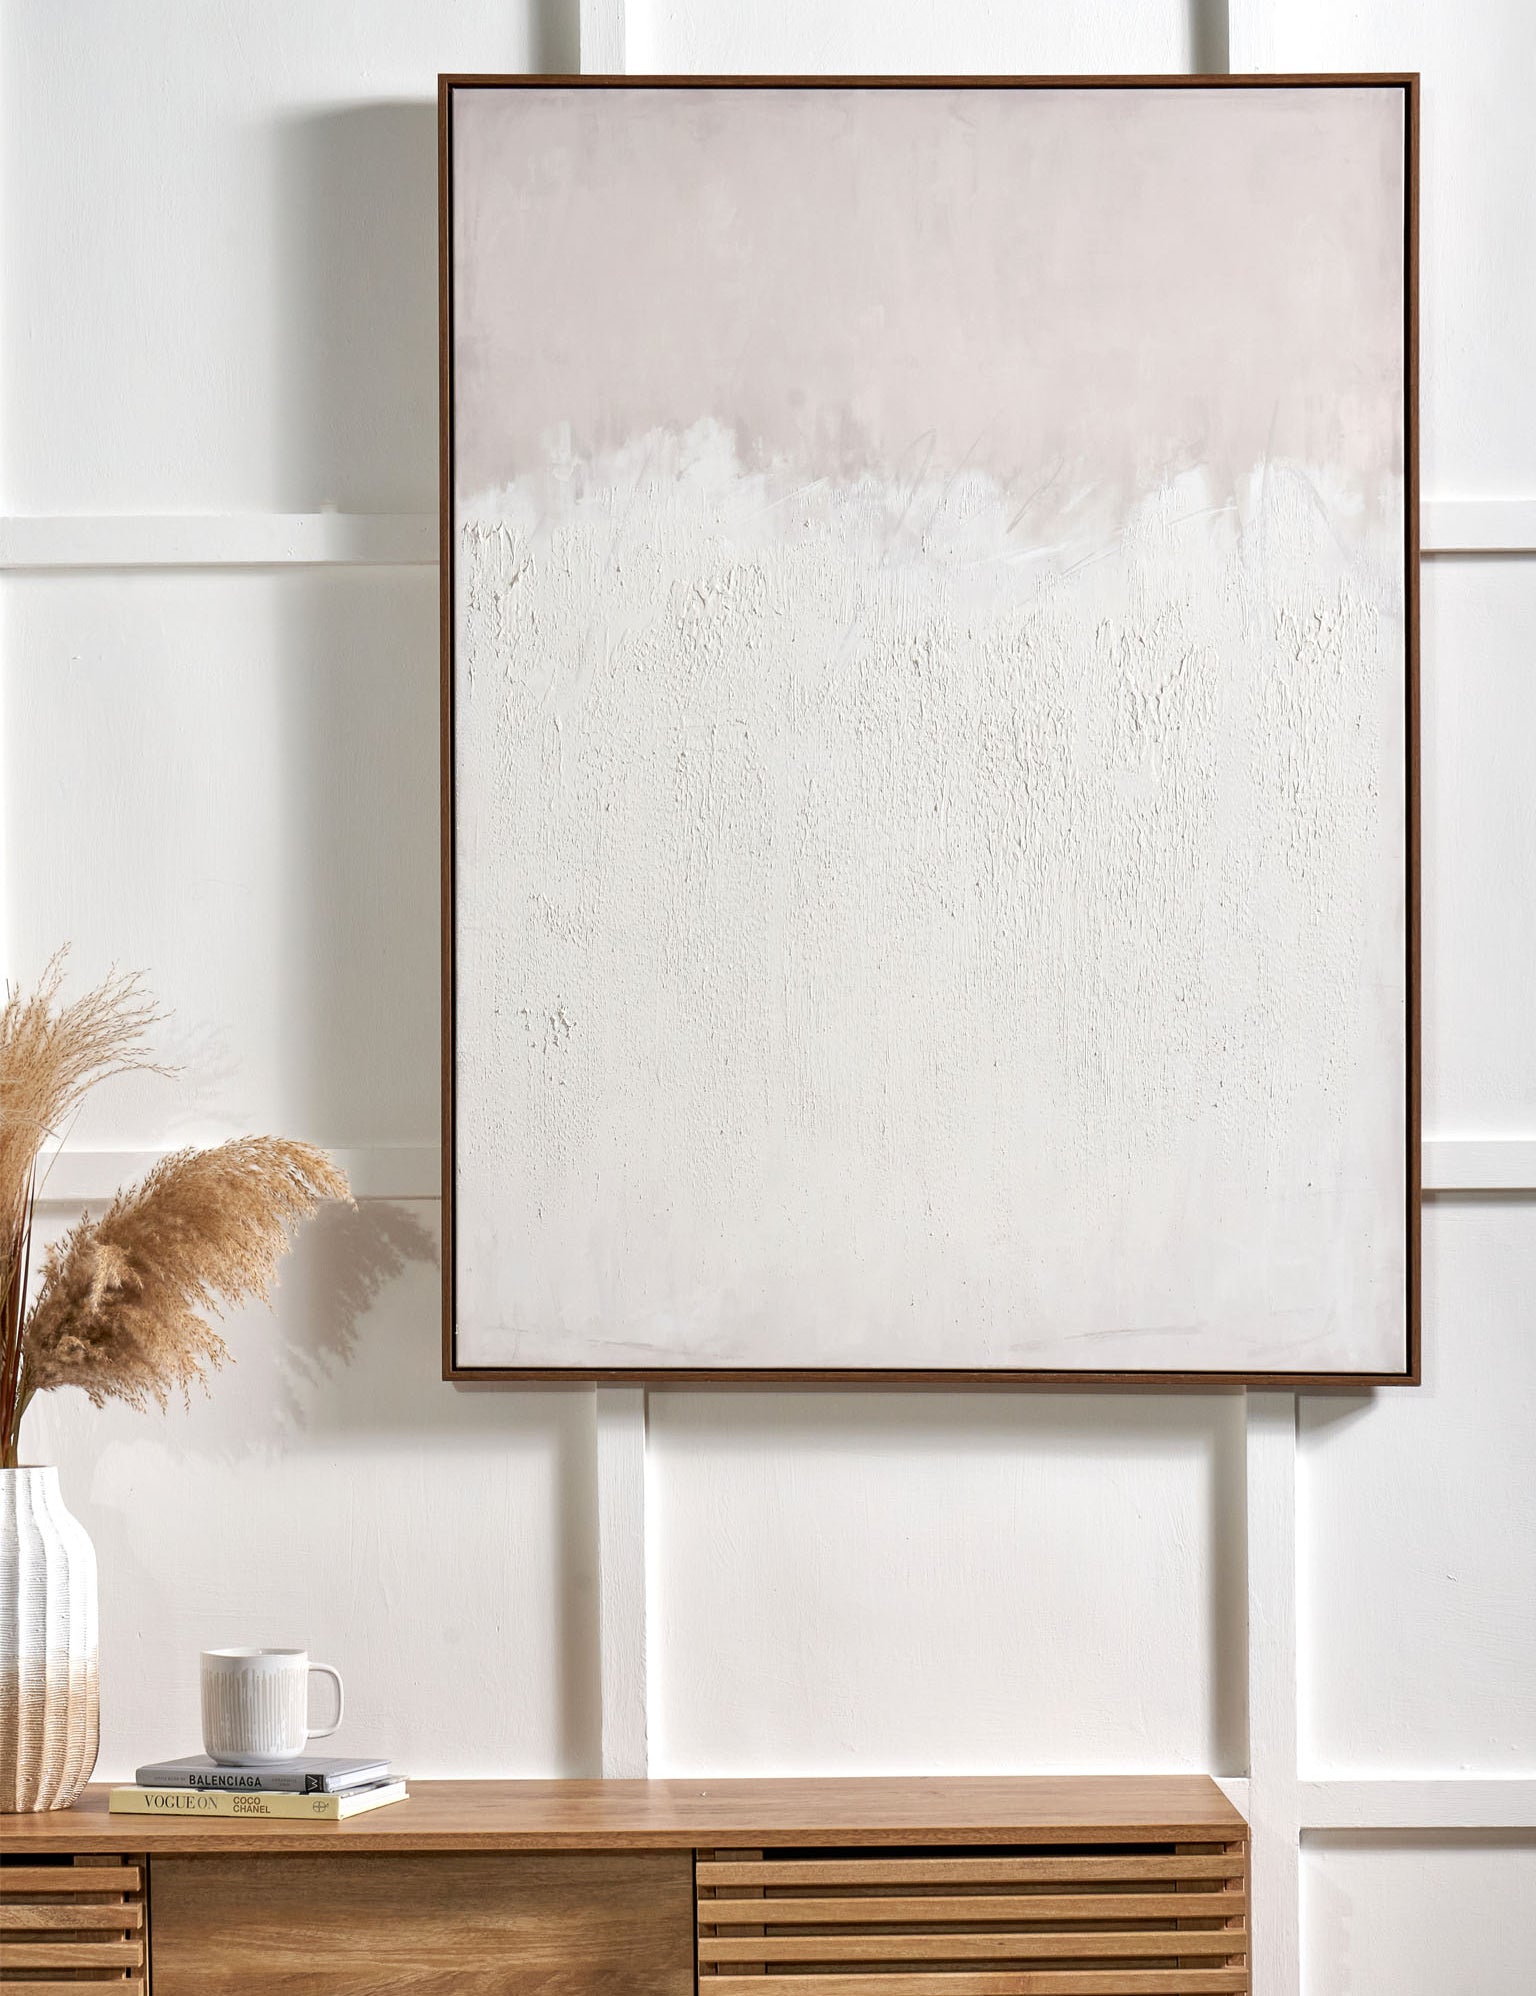 natural canvas with wooden frame